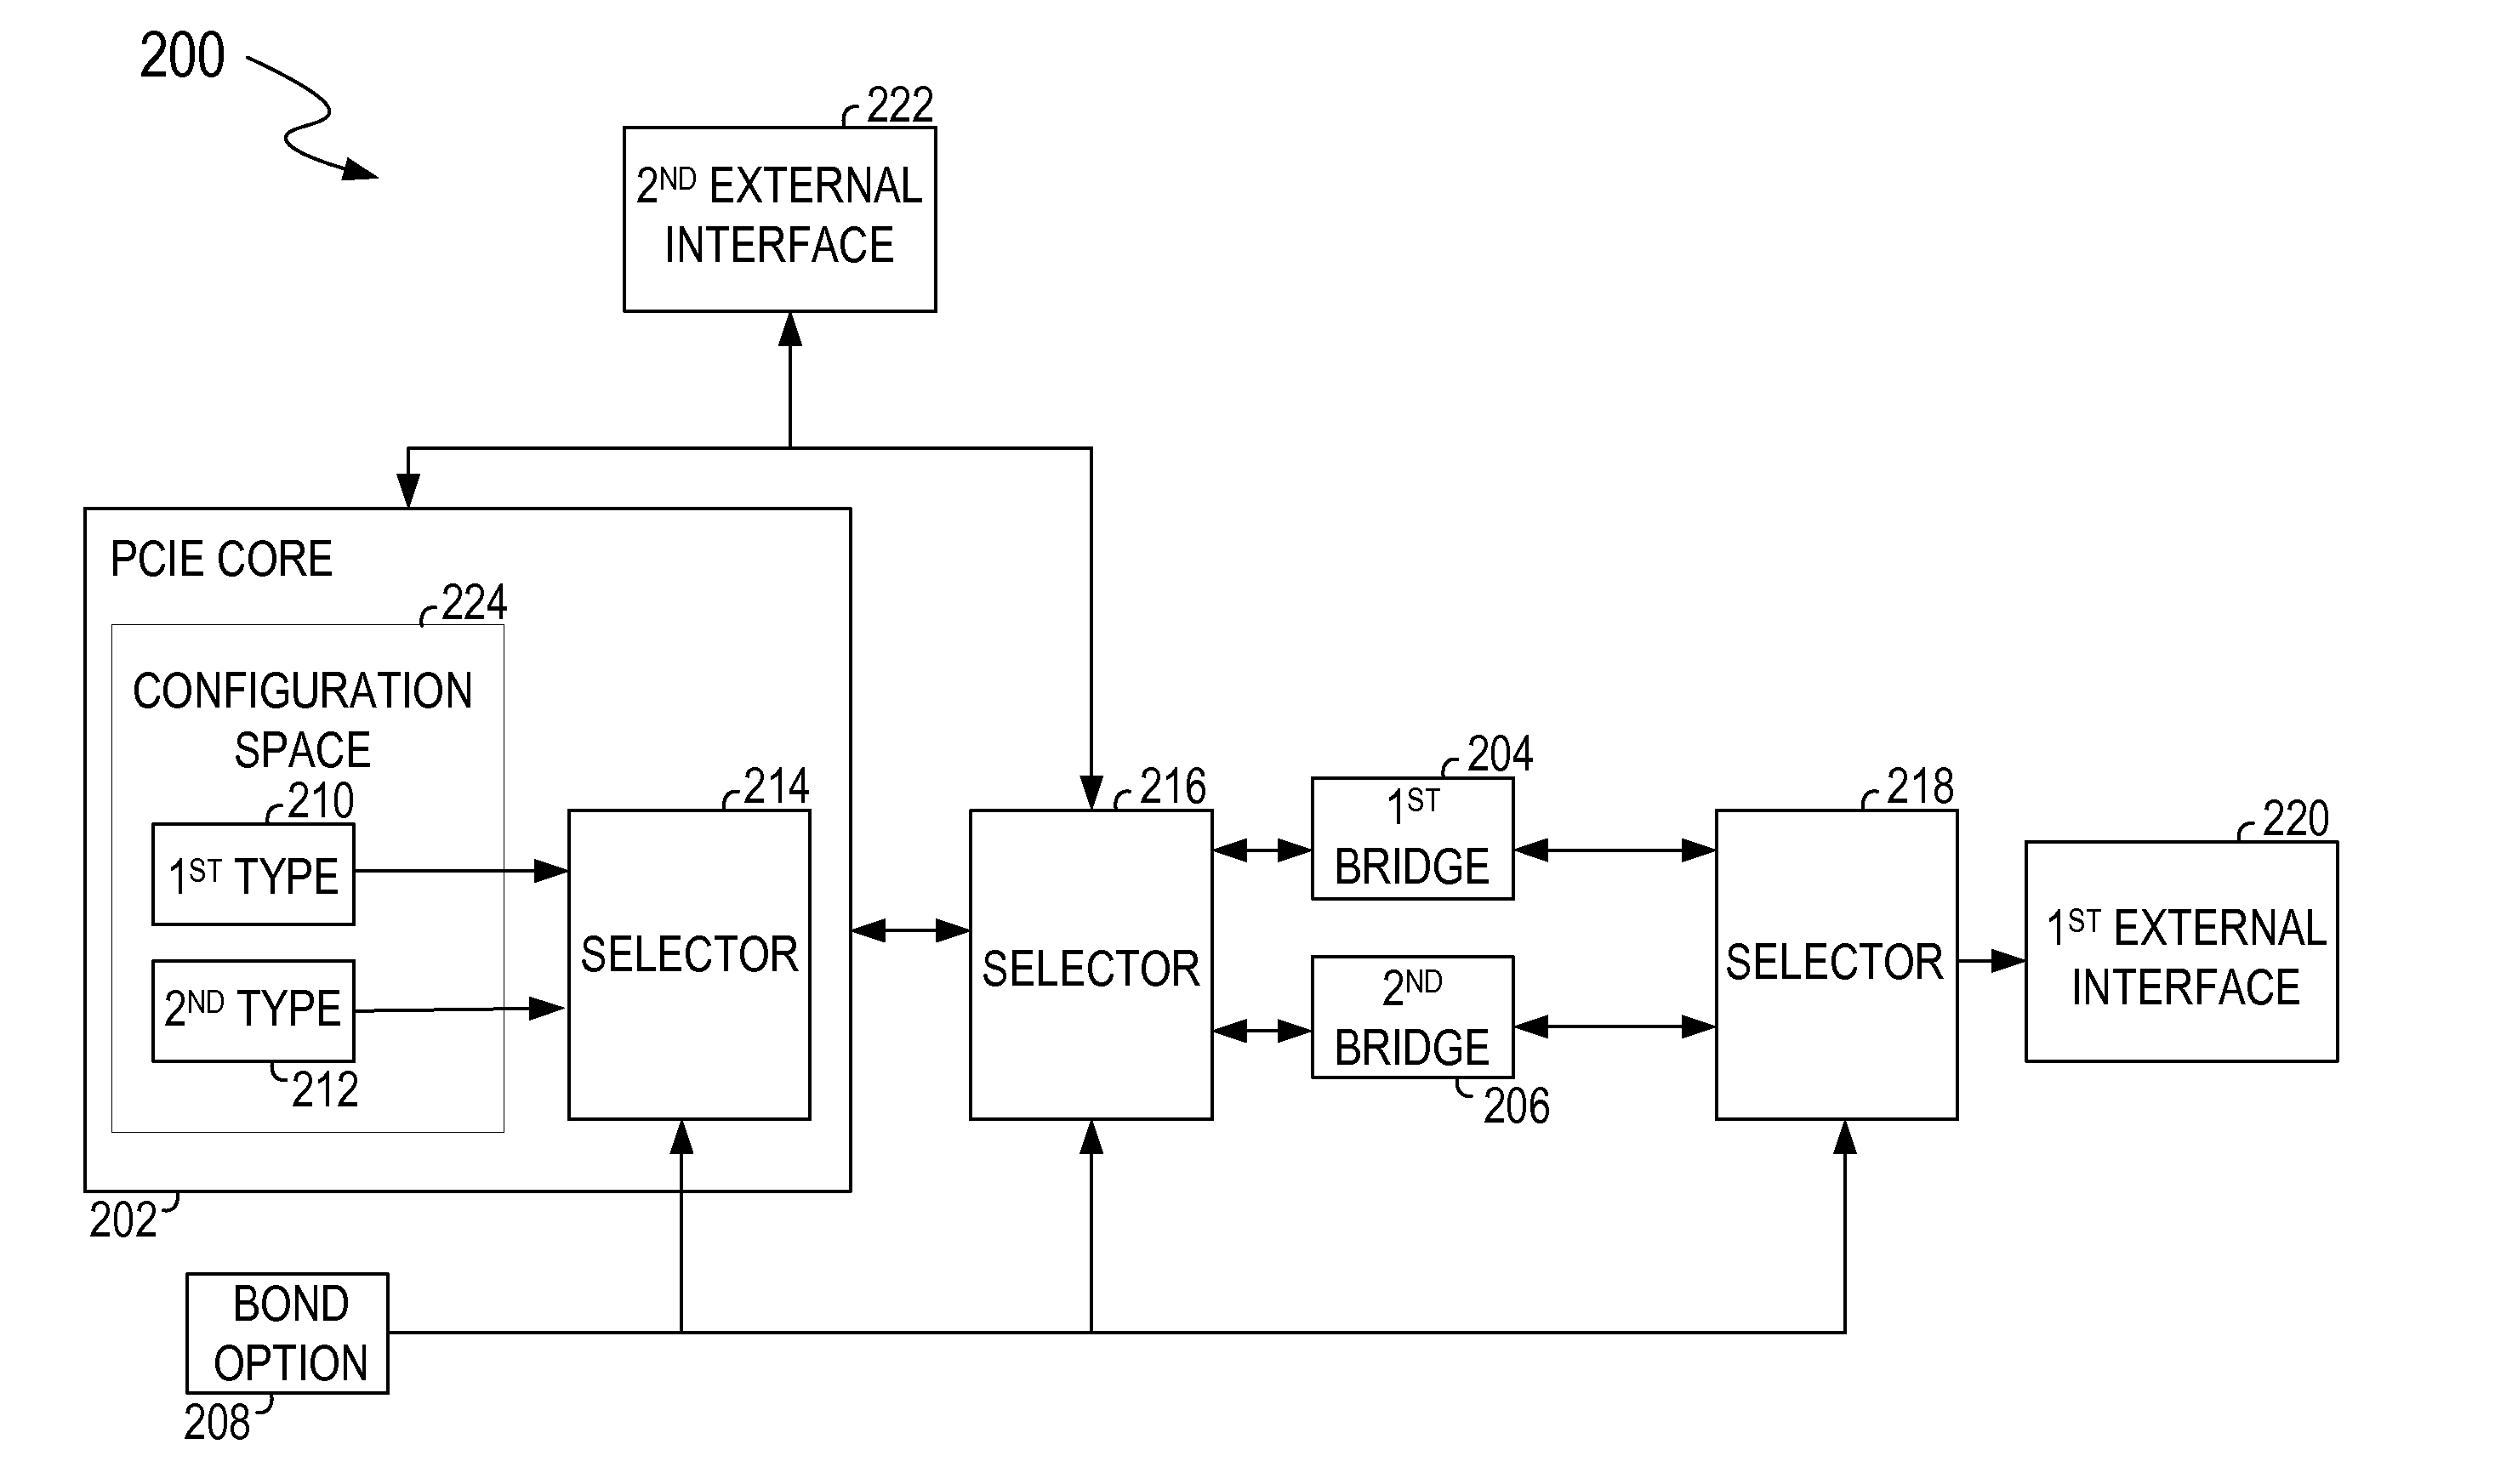 Use of bond option to alternate between PCI configuration space